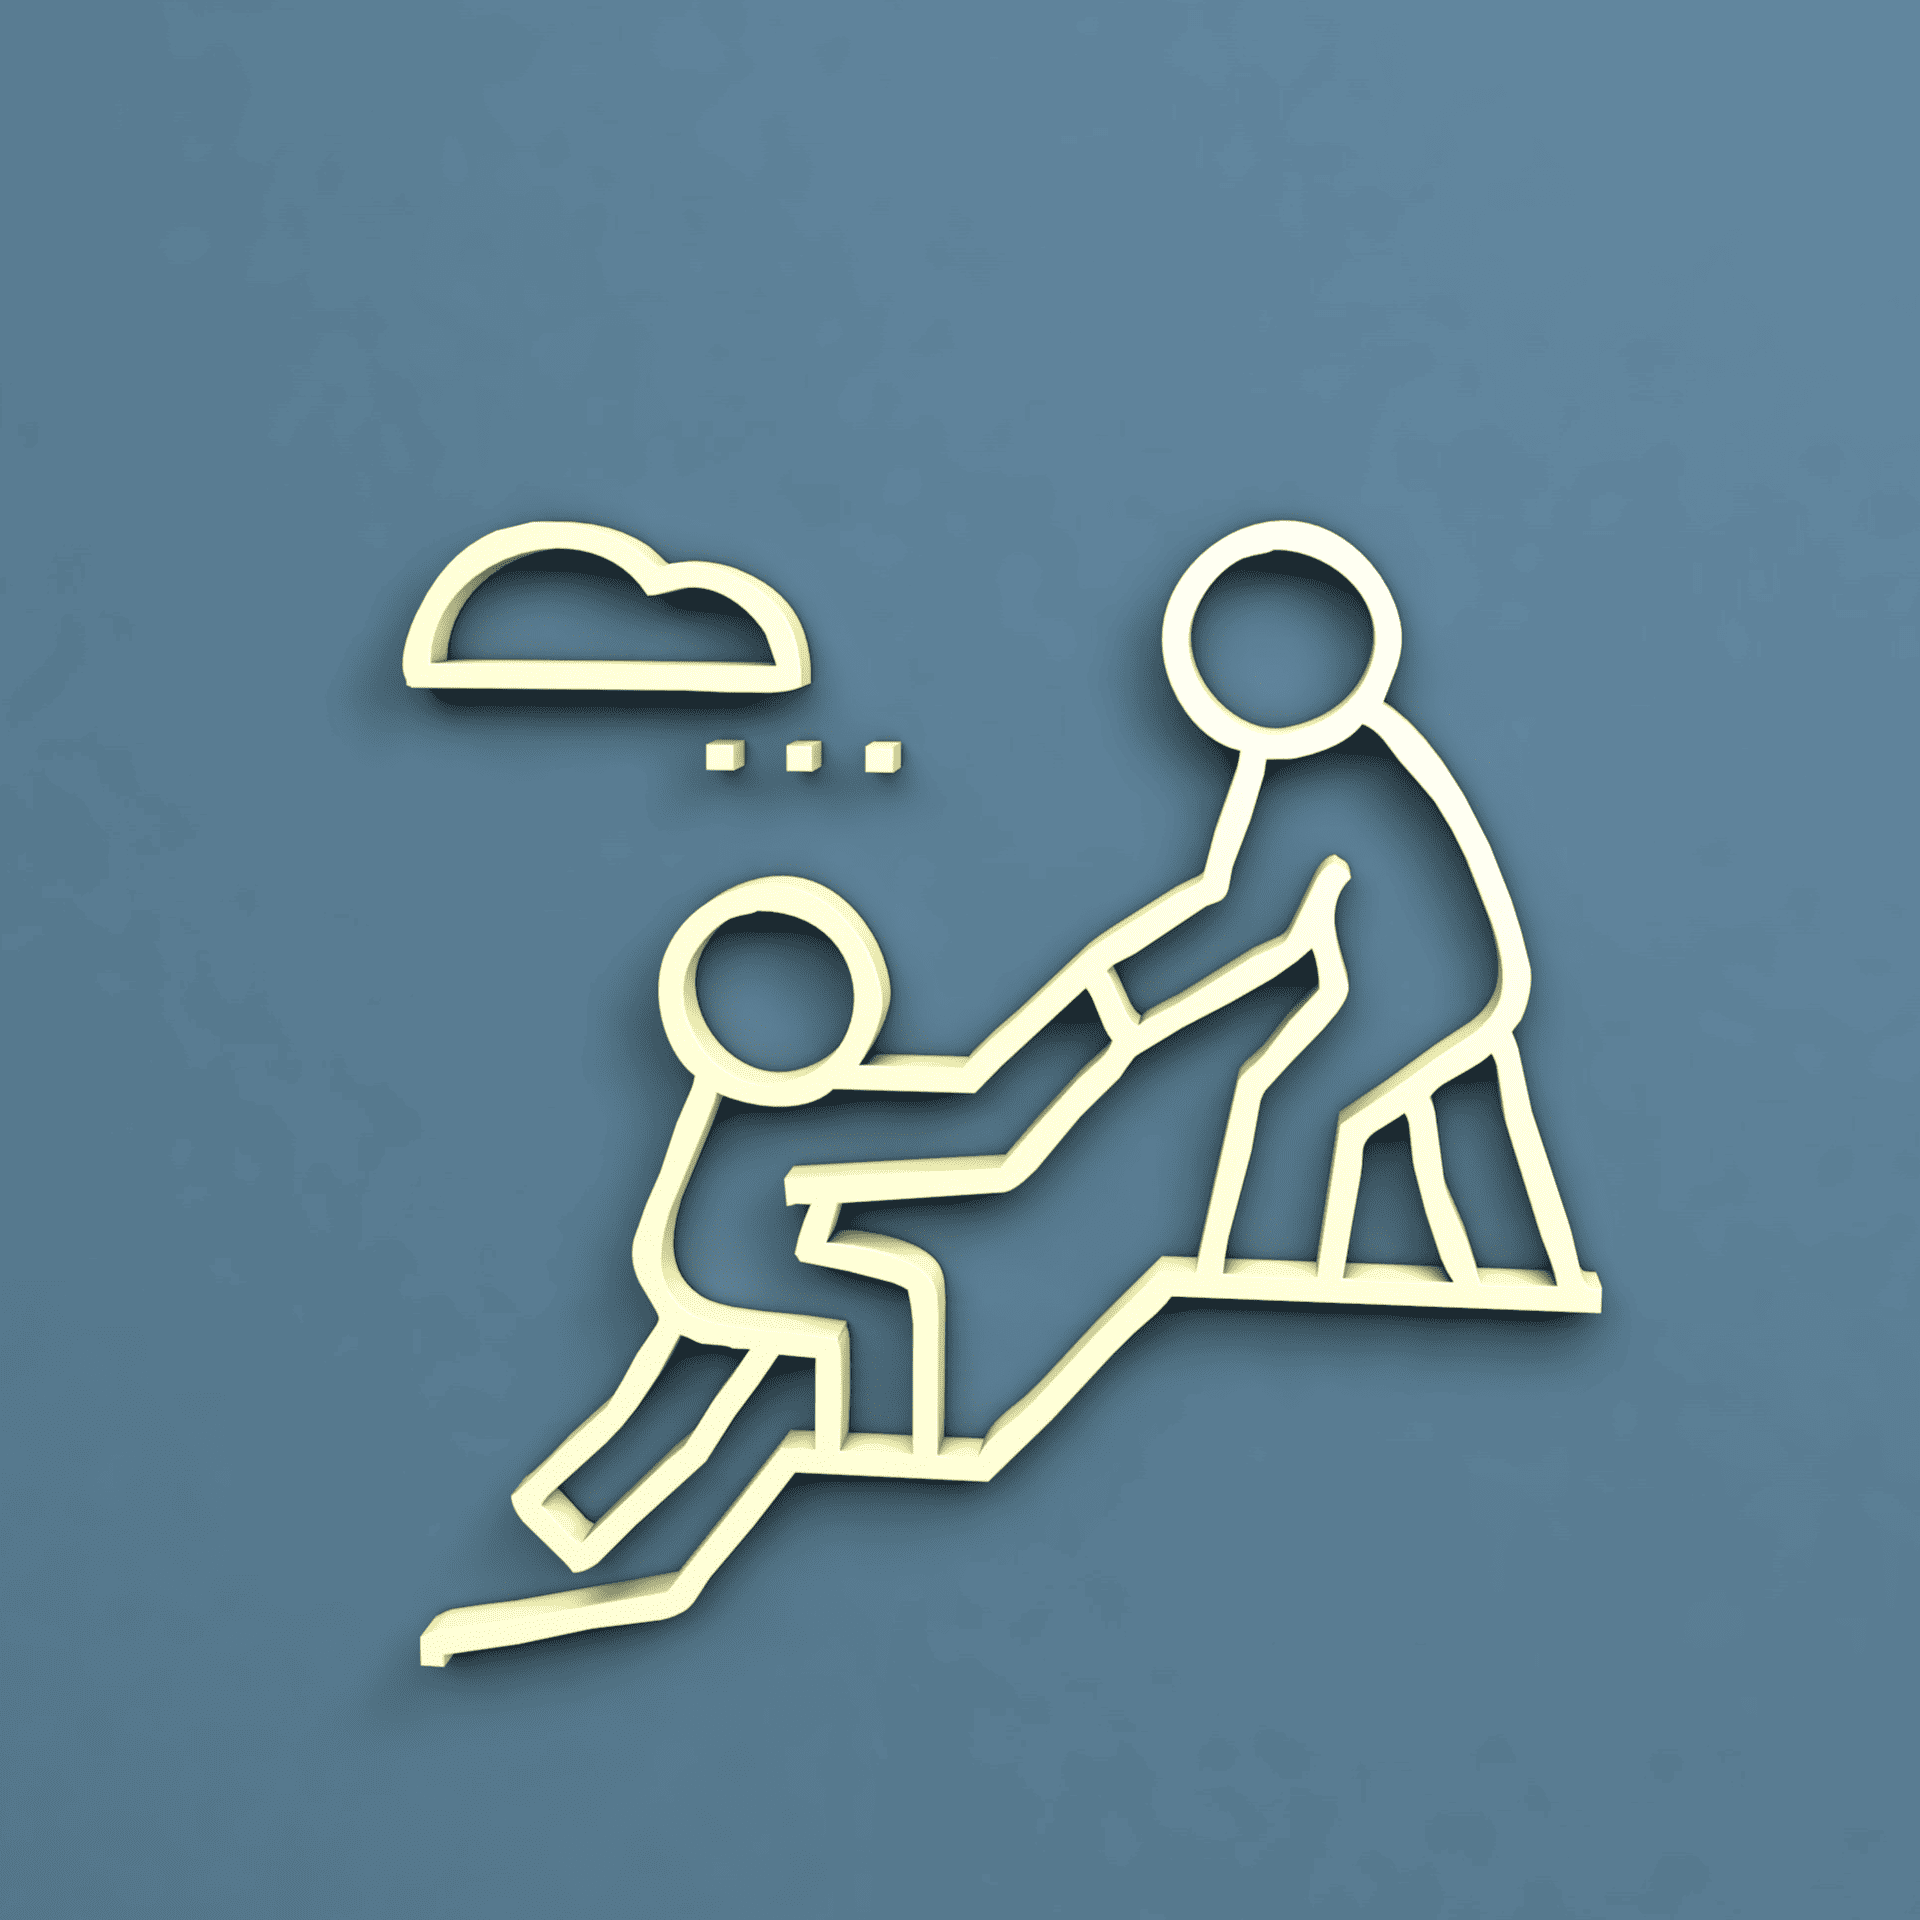 Illustration of two stick figures in a mentoring situation. The figure on the right is helping the other figure on the left to stand up, symbolizing support and assistance. Above them is a thought bubble with three dots, indicating thinking or conversation. The background is a flat blue color, and the figures are outlined in a contrasting yellow, creating a minimalist and modern design.